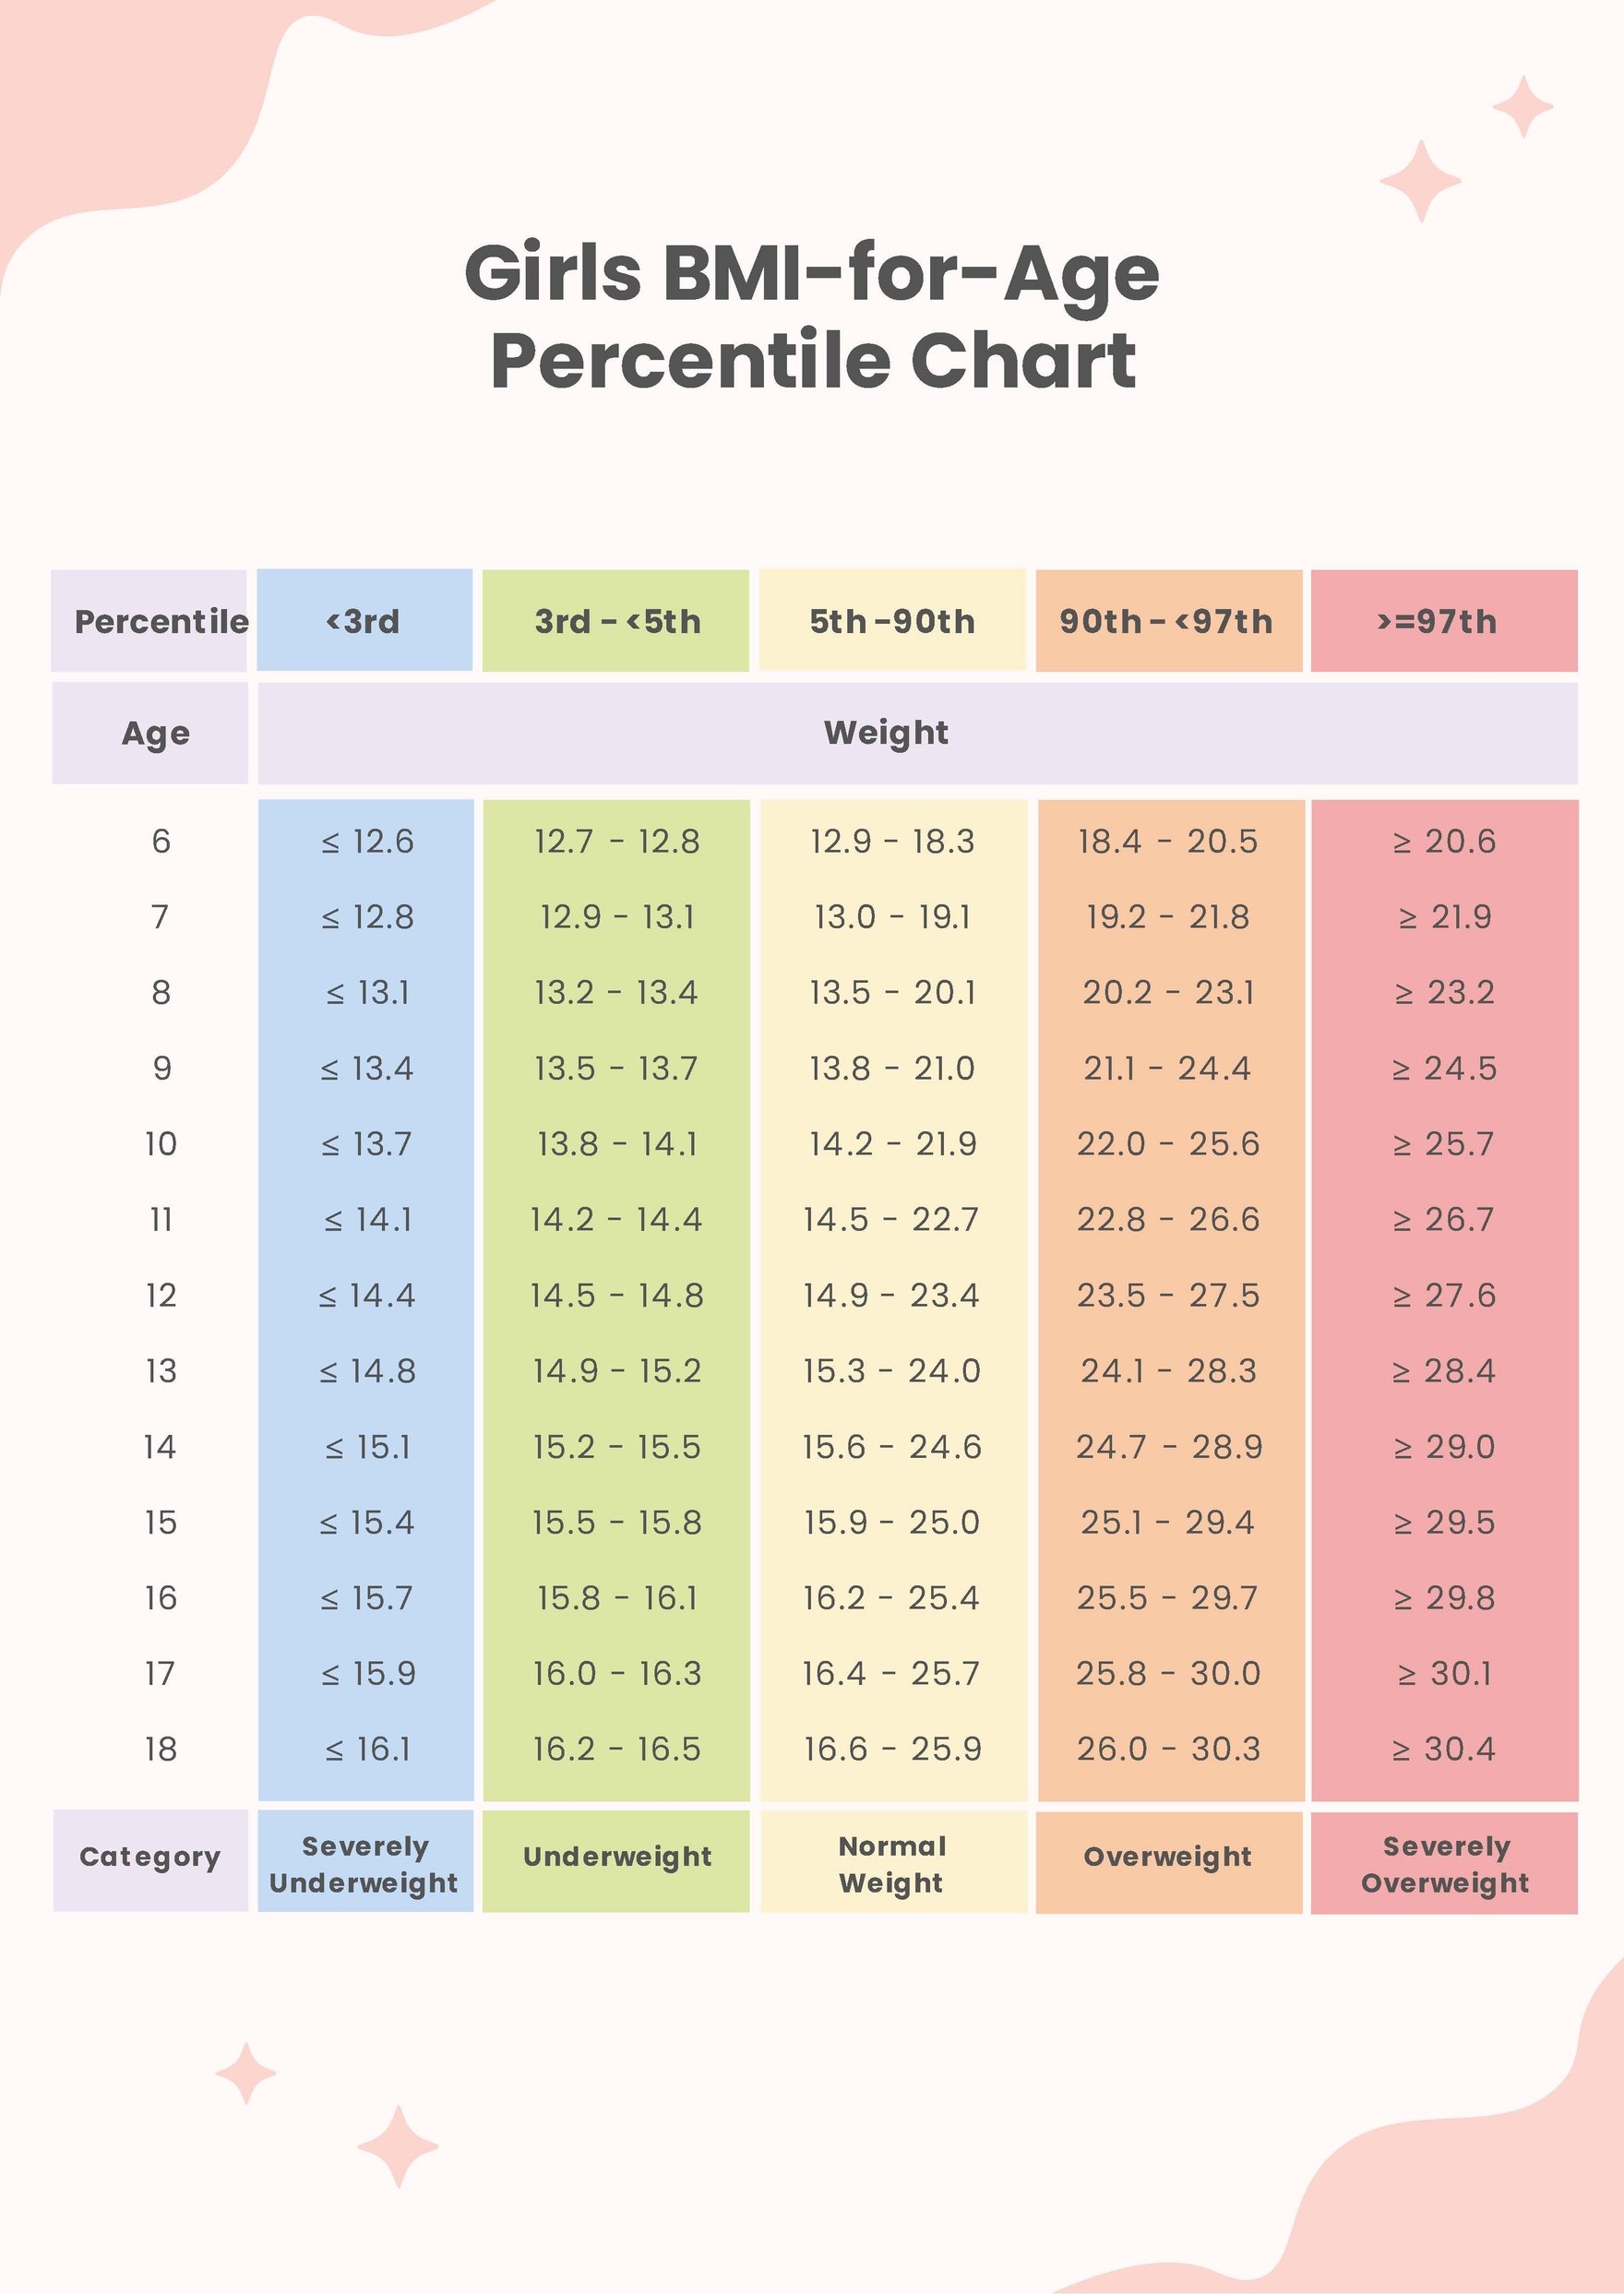 Girls BMI-For-Age Percentile Chart Template